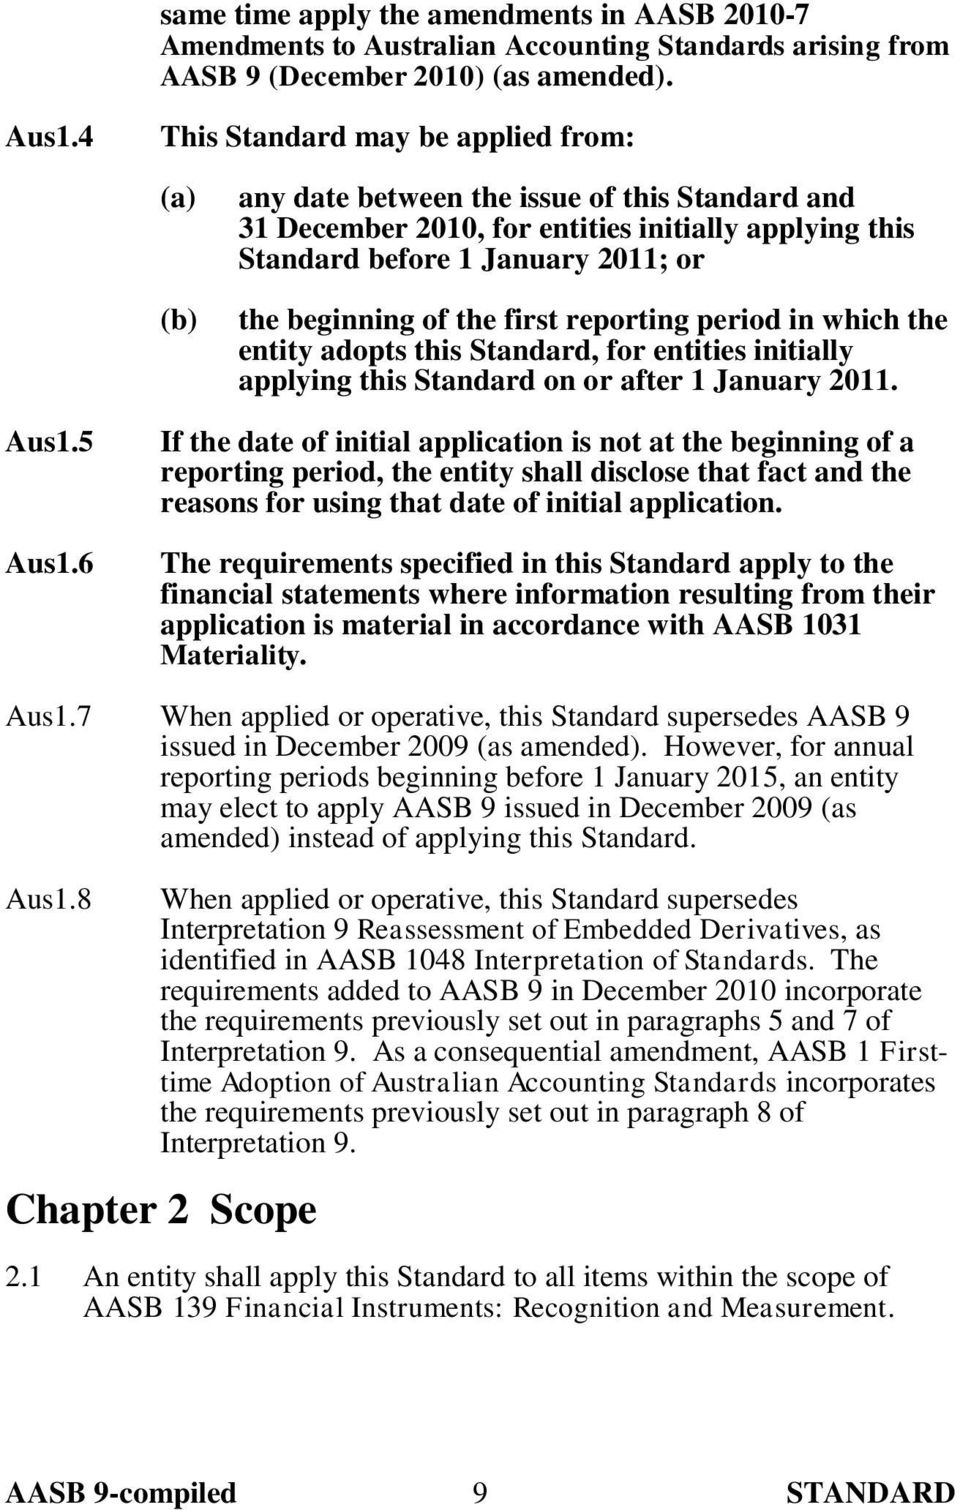 first reporting period in which the entity adopts this Standard, for entities initially applying this Standard on or after 1 January 2011. Aus1.5 Aus1.